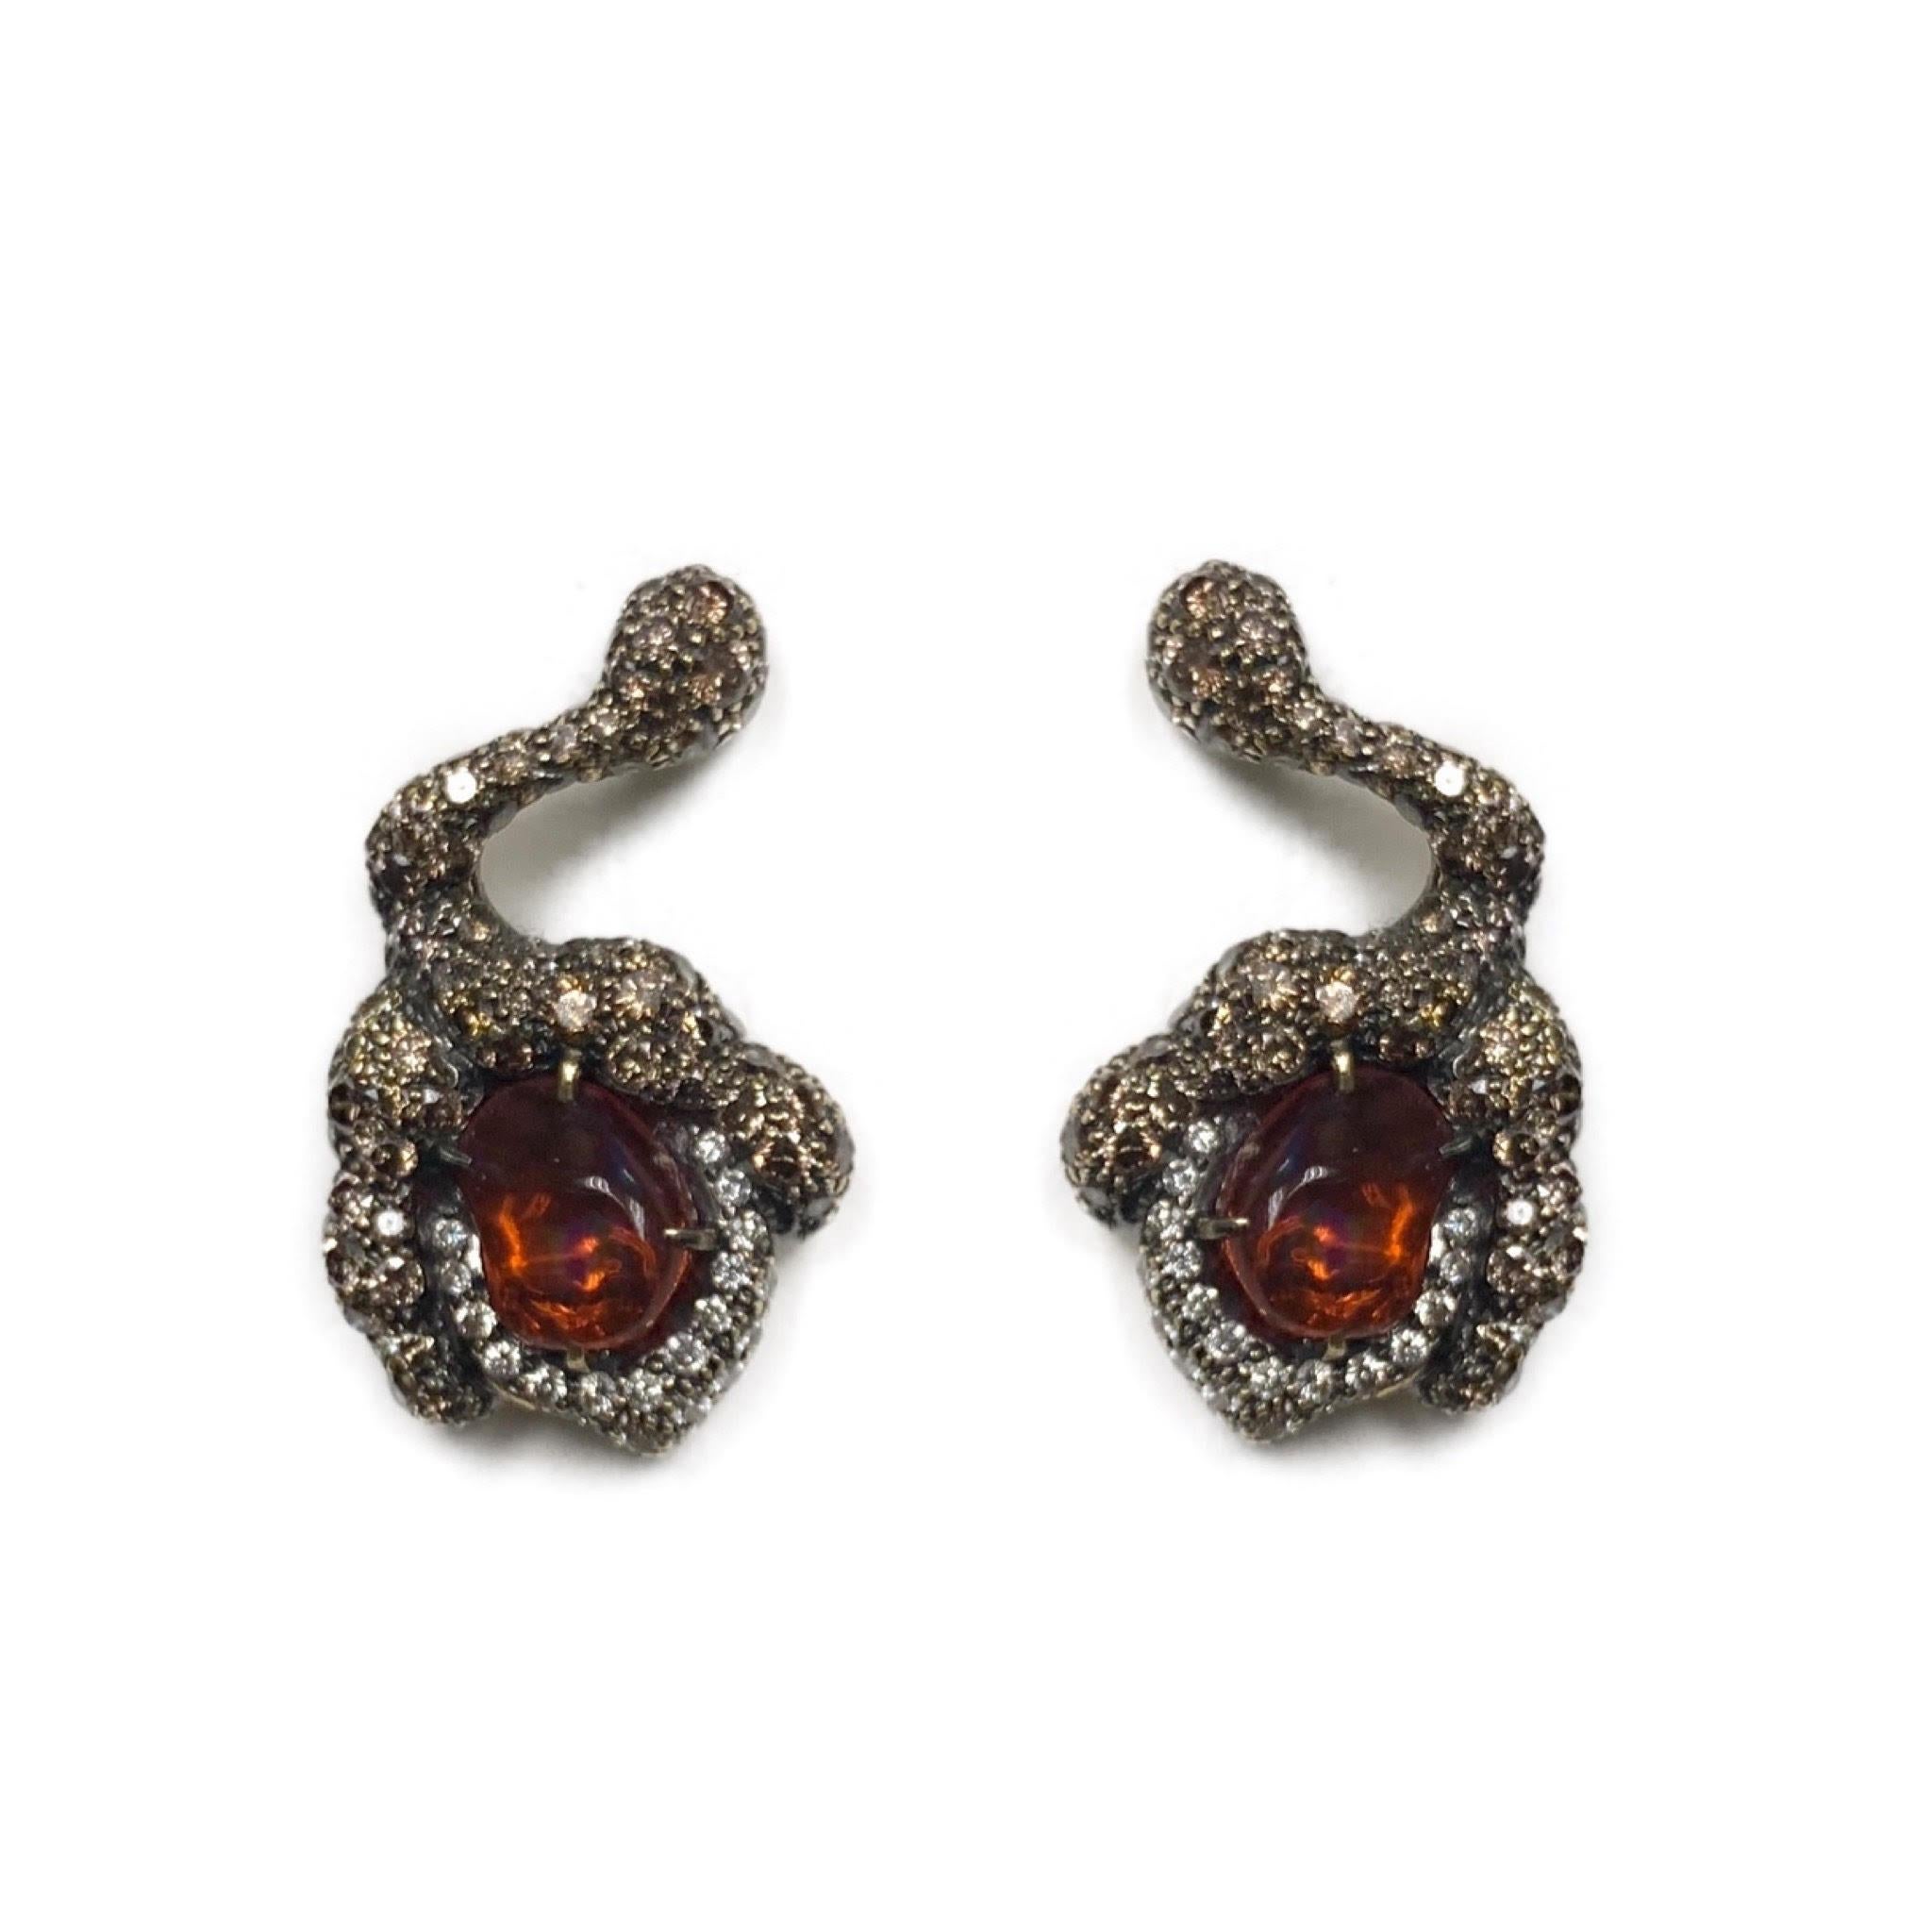 These unique fire opal flower bud earrings feature mesmerizing fire opals and diamonds set in 18 karat blackened gold. Two cabochon cut fire opals weighing 1.65 carats are surrounded by 3.53 carats of diamonds, resulting in the intricate and